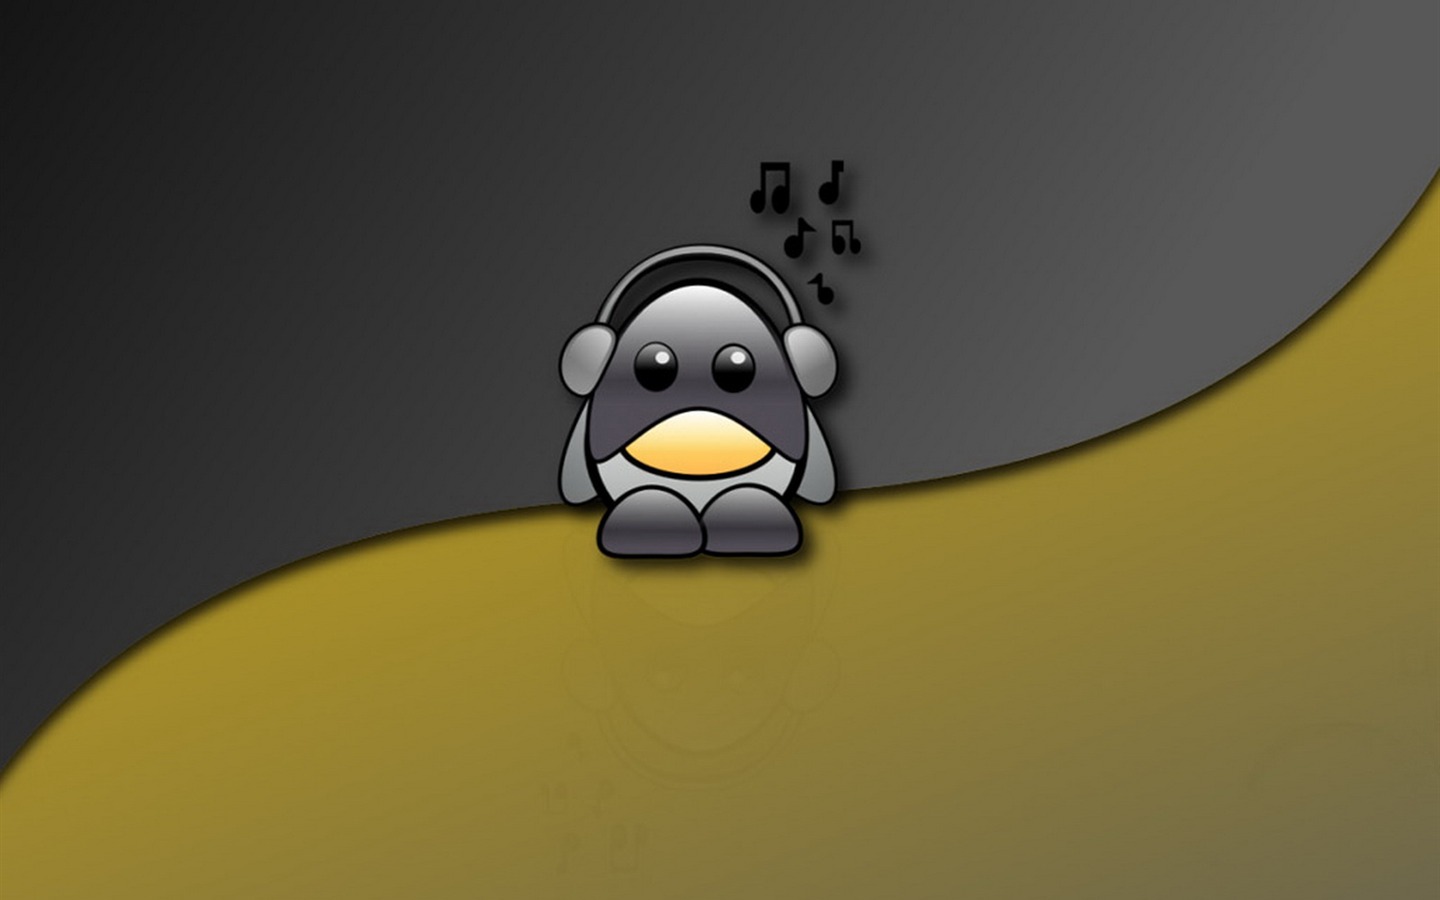 Linux tapety (2) #13 - 1440x900